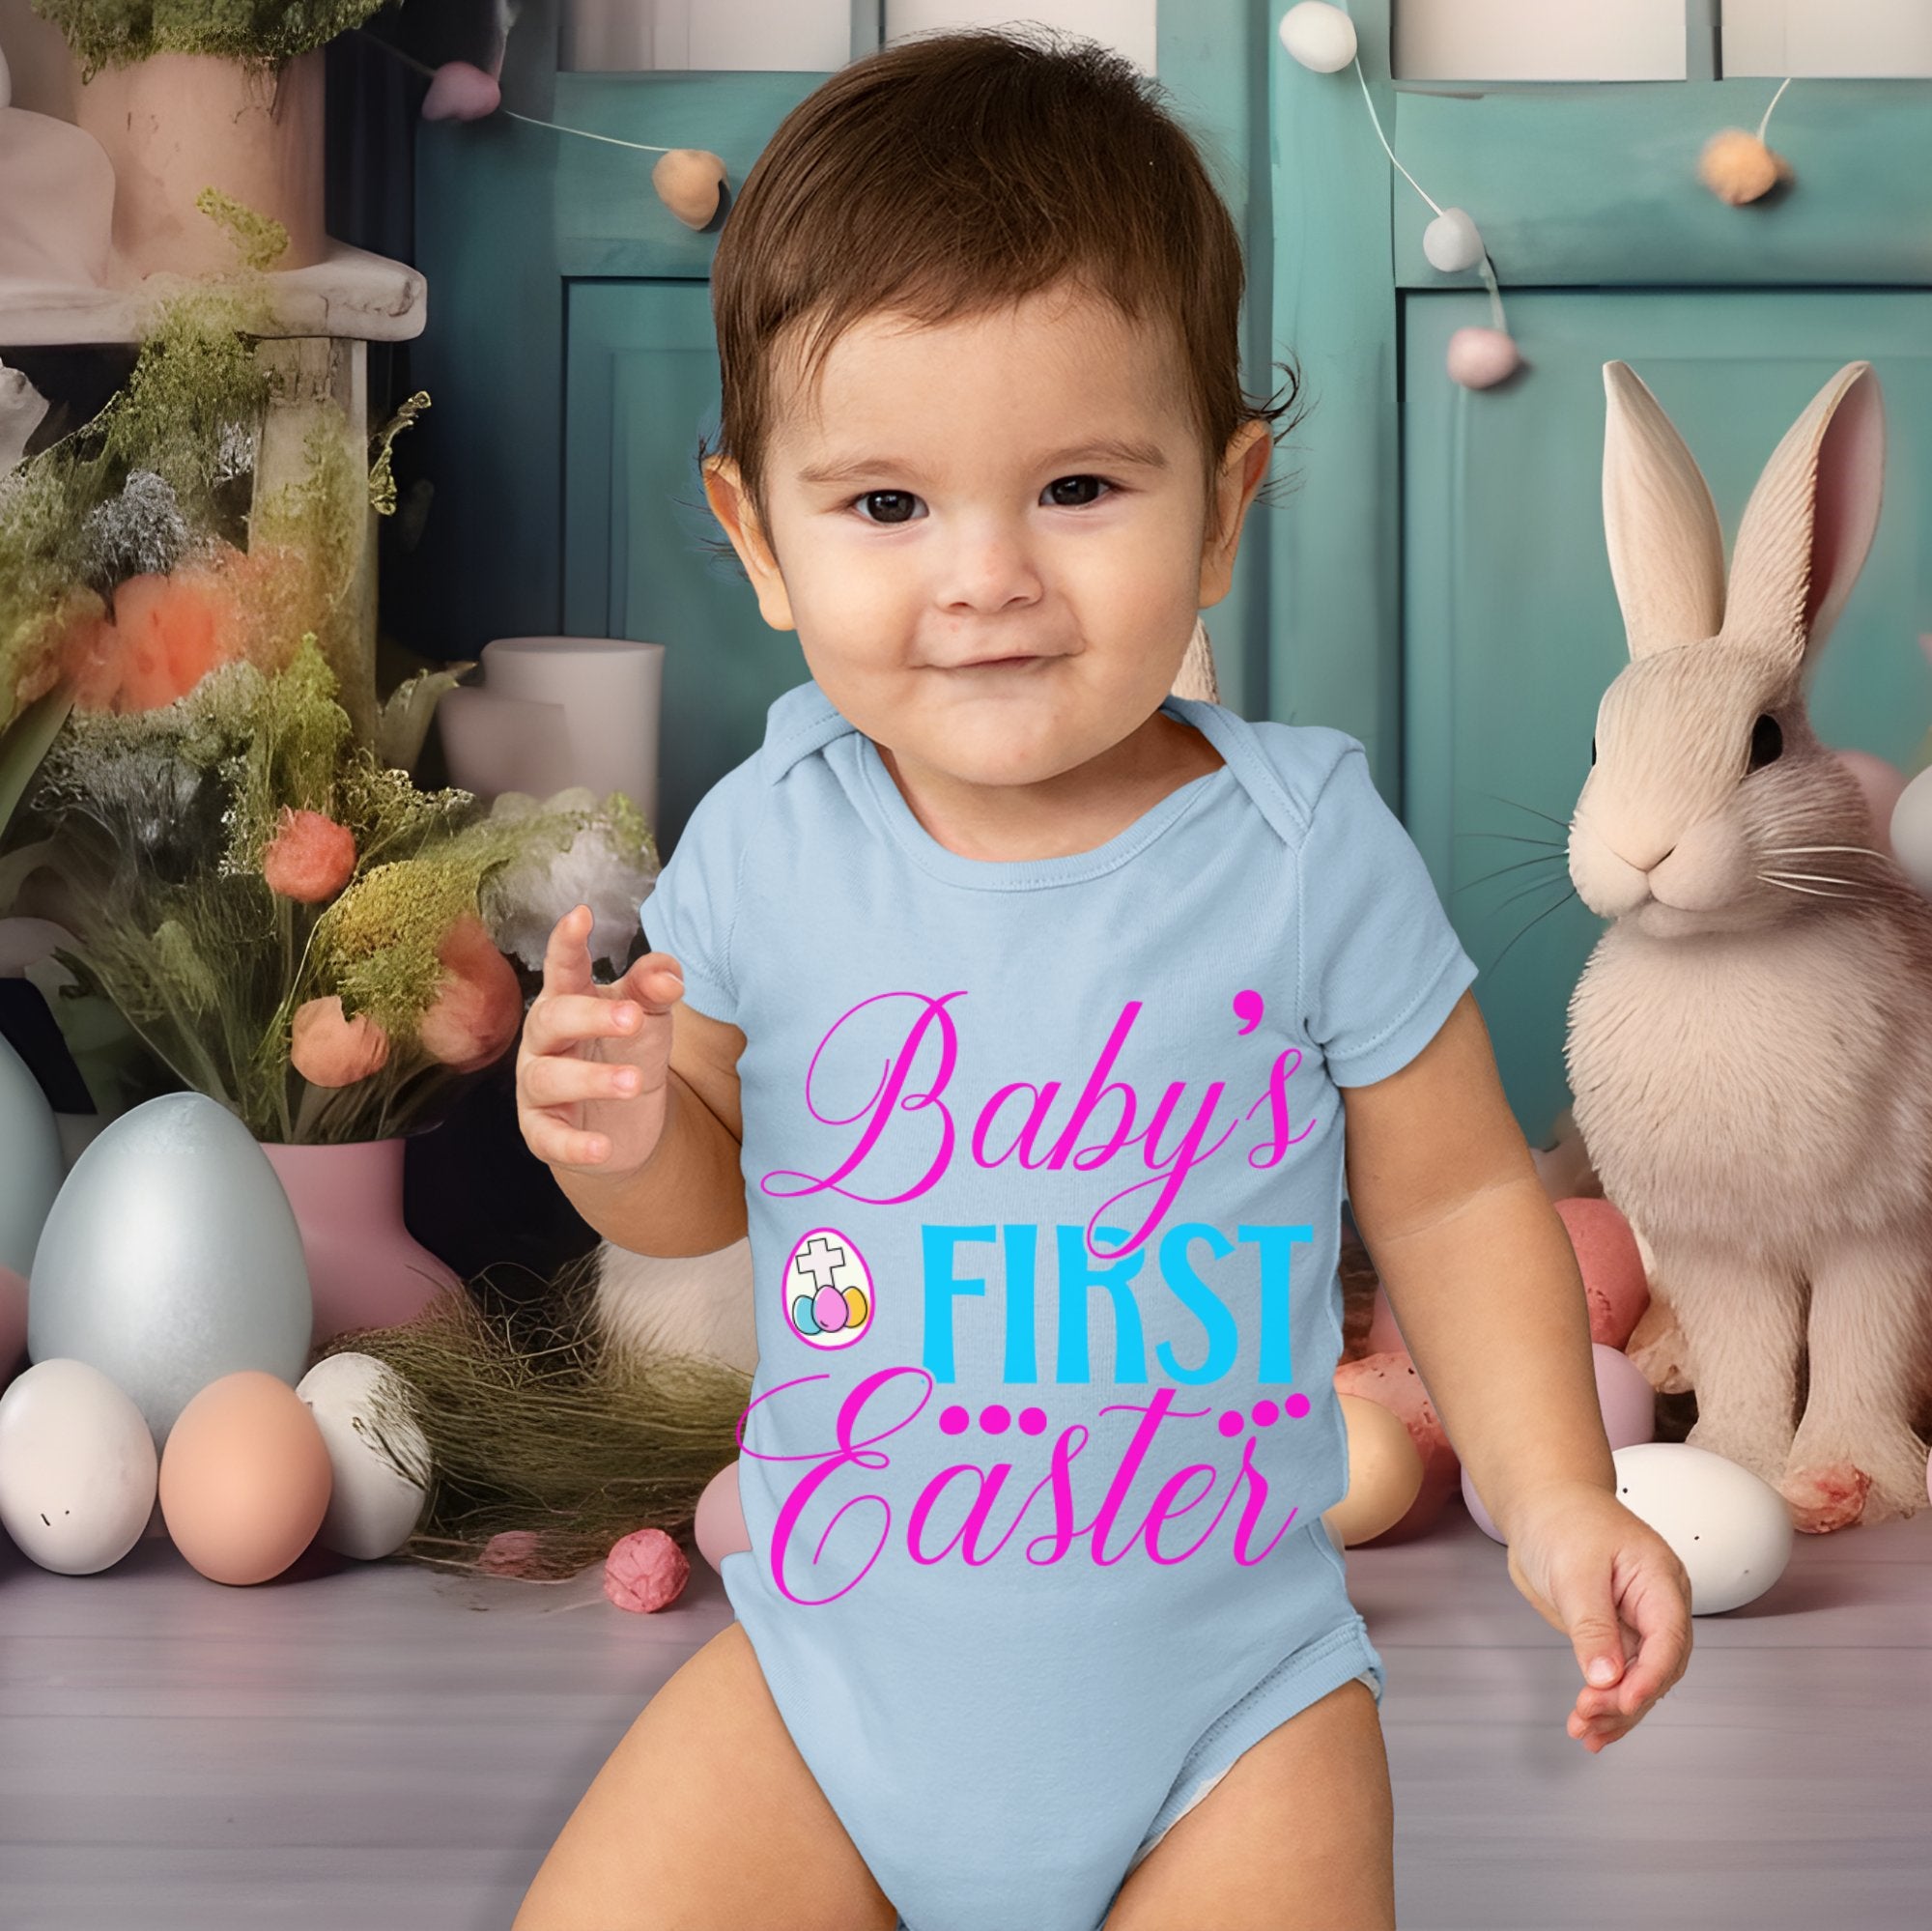 Baby's First Easter Cross Eggs Infant Fine Jersey Bodysuit Size: 6mo Color: White Jesus Passion Apparel